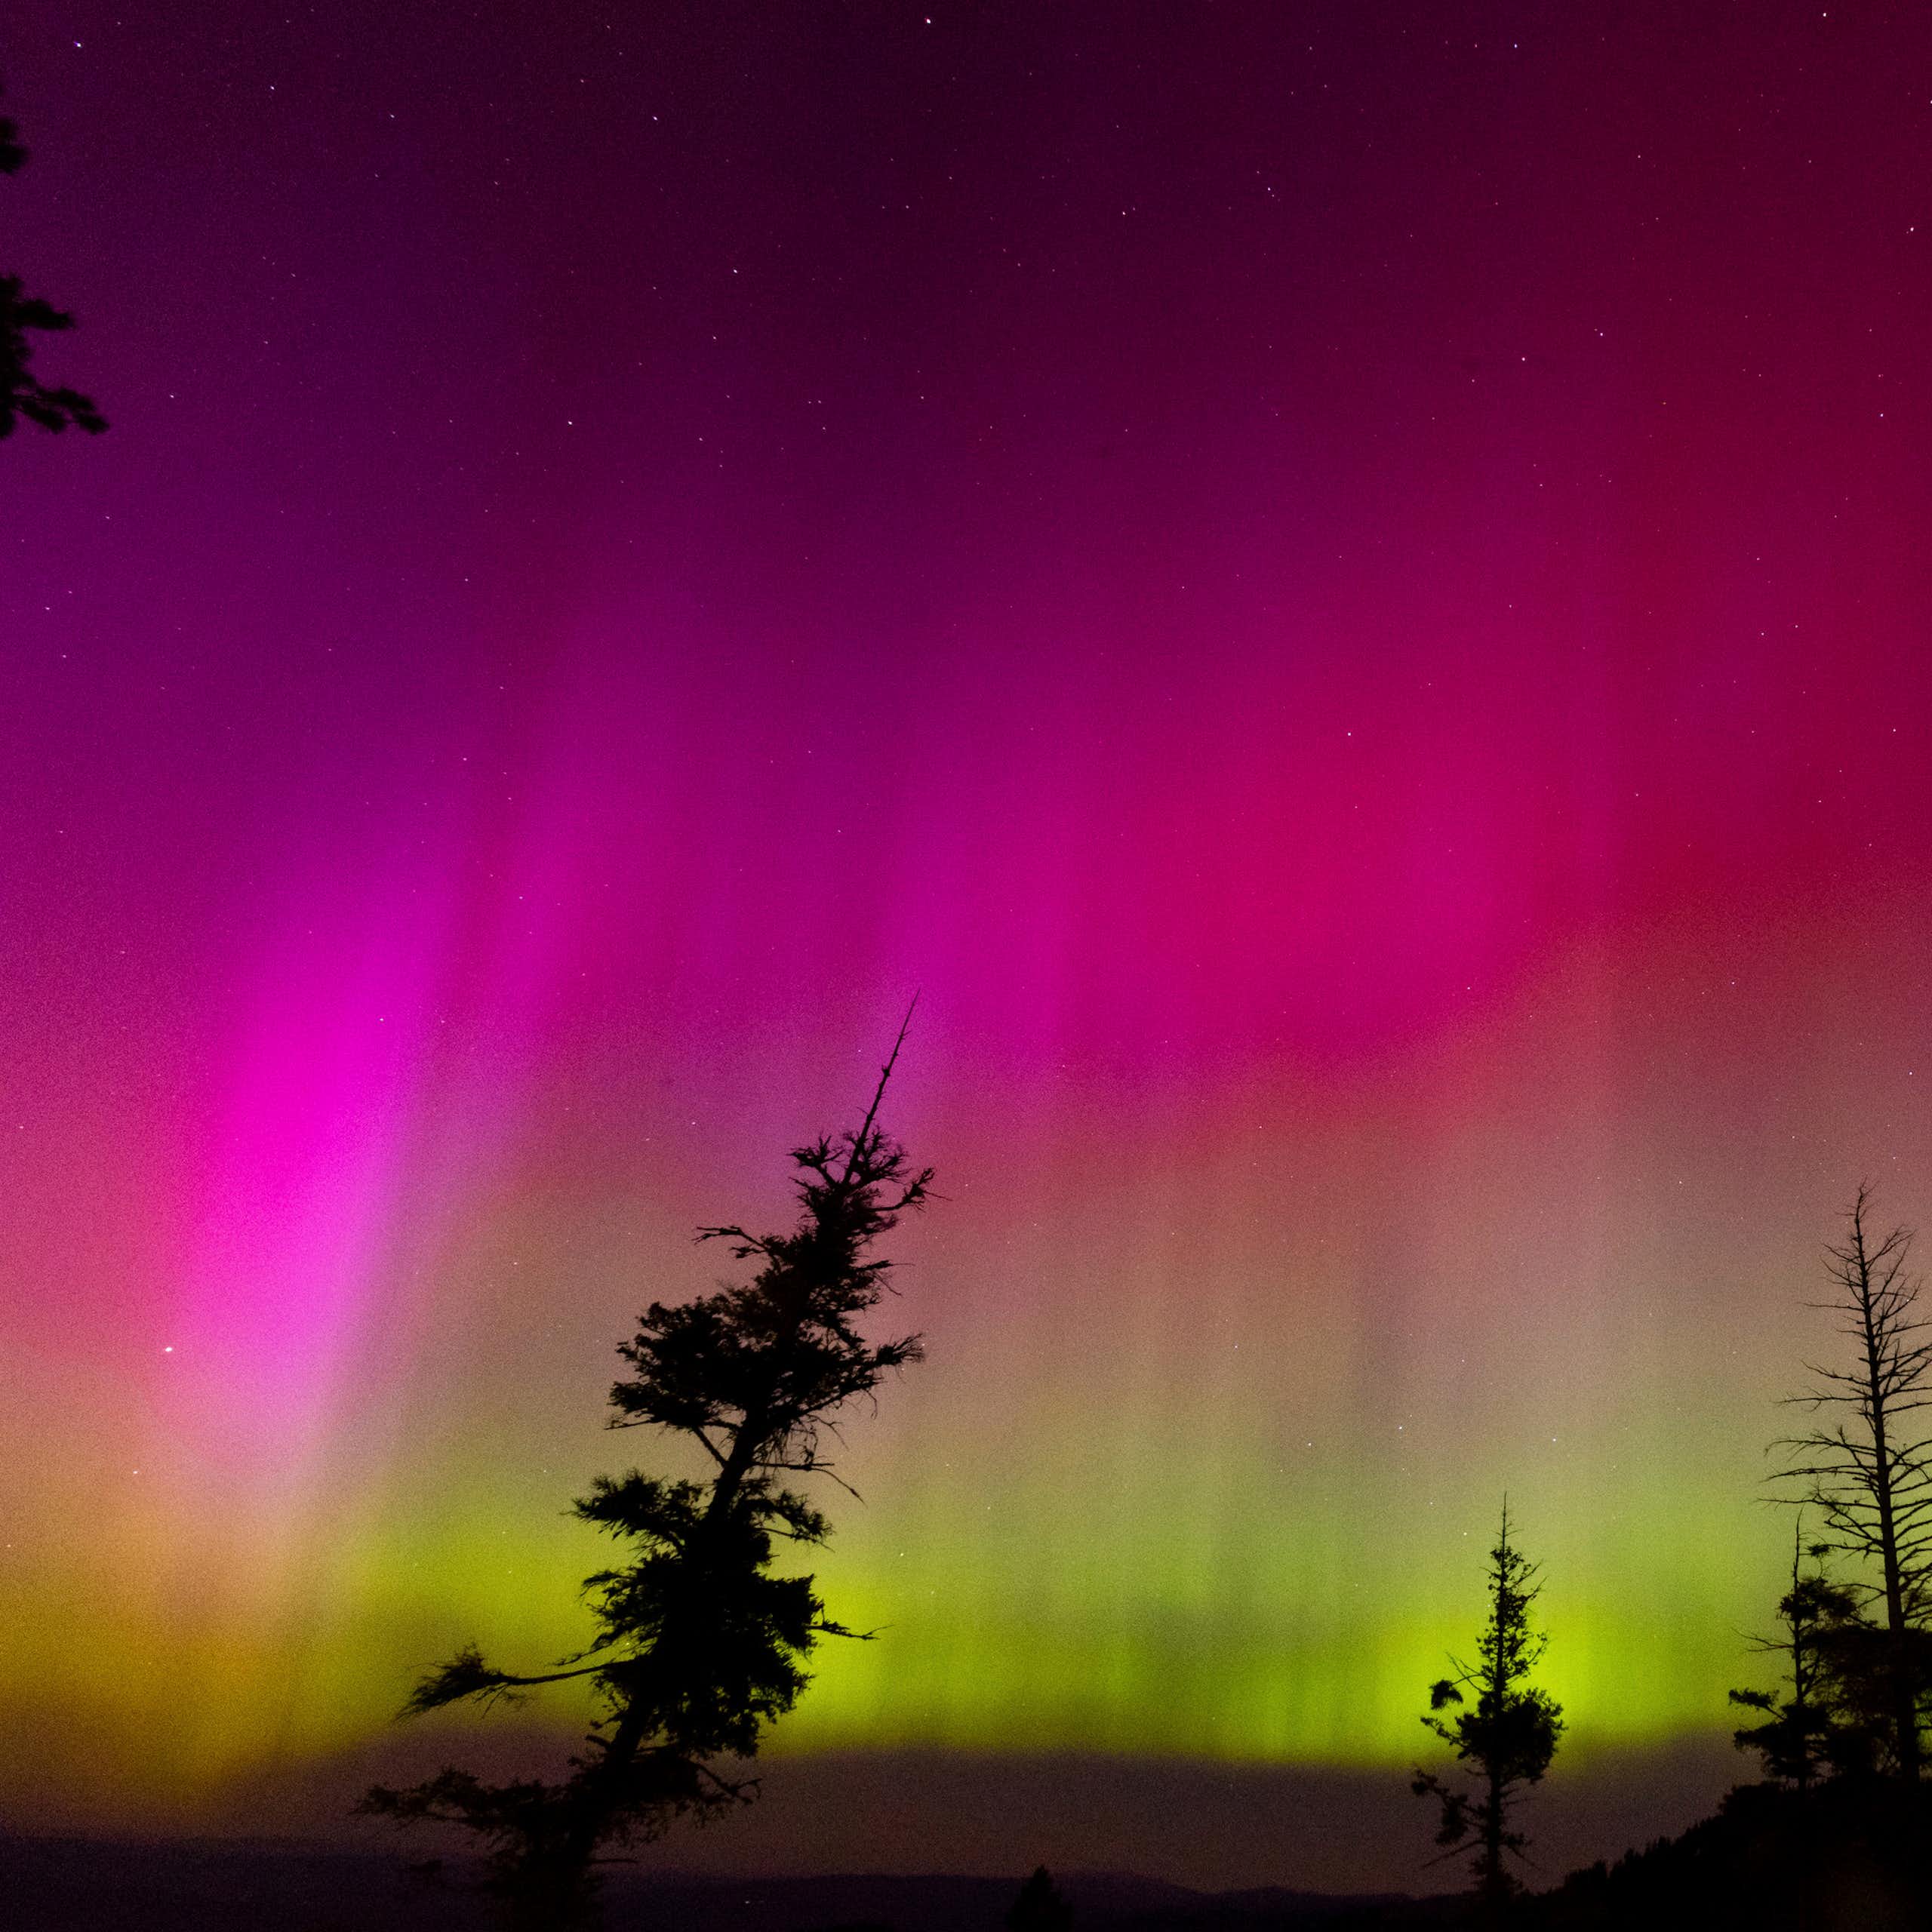 The night sky with magenta and red shades up high and bright green lower at the horizon.